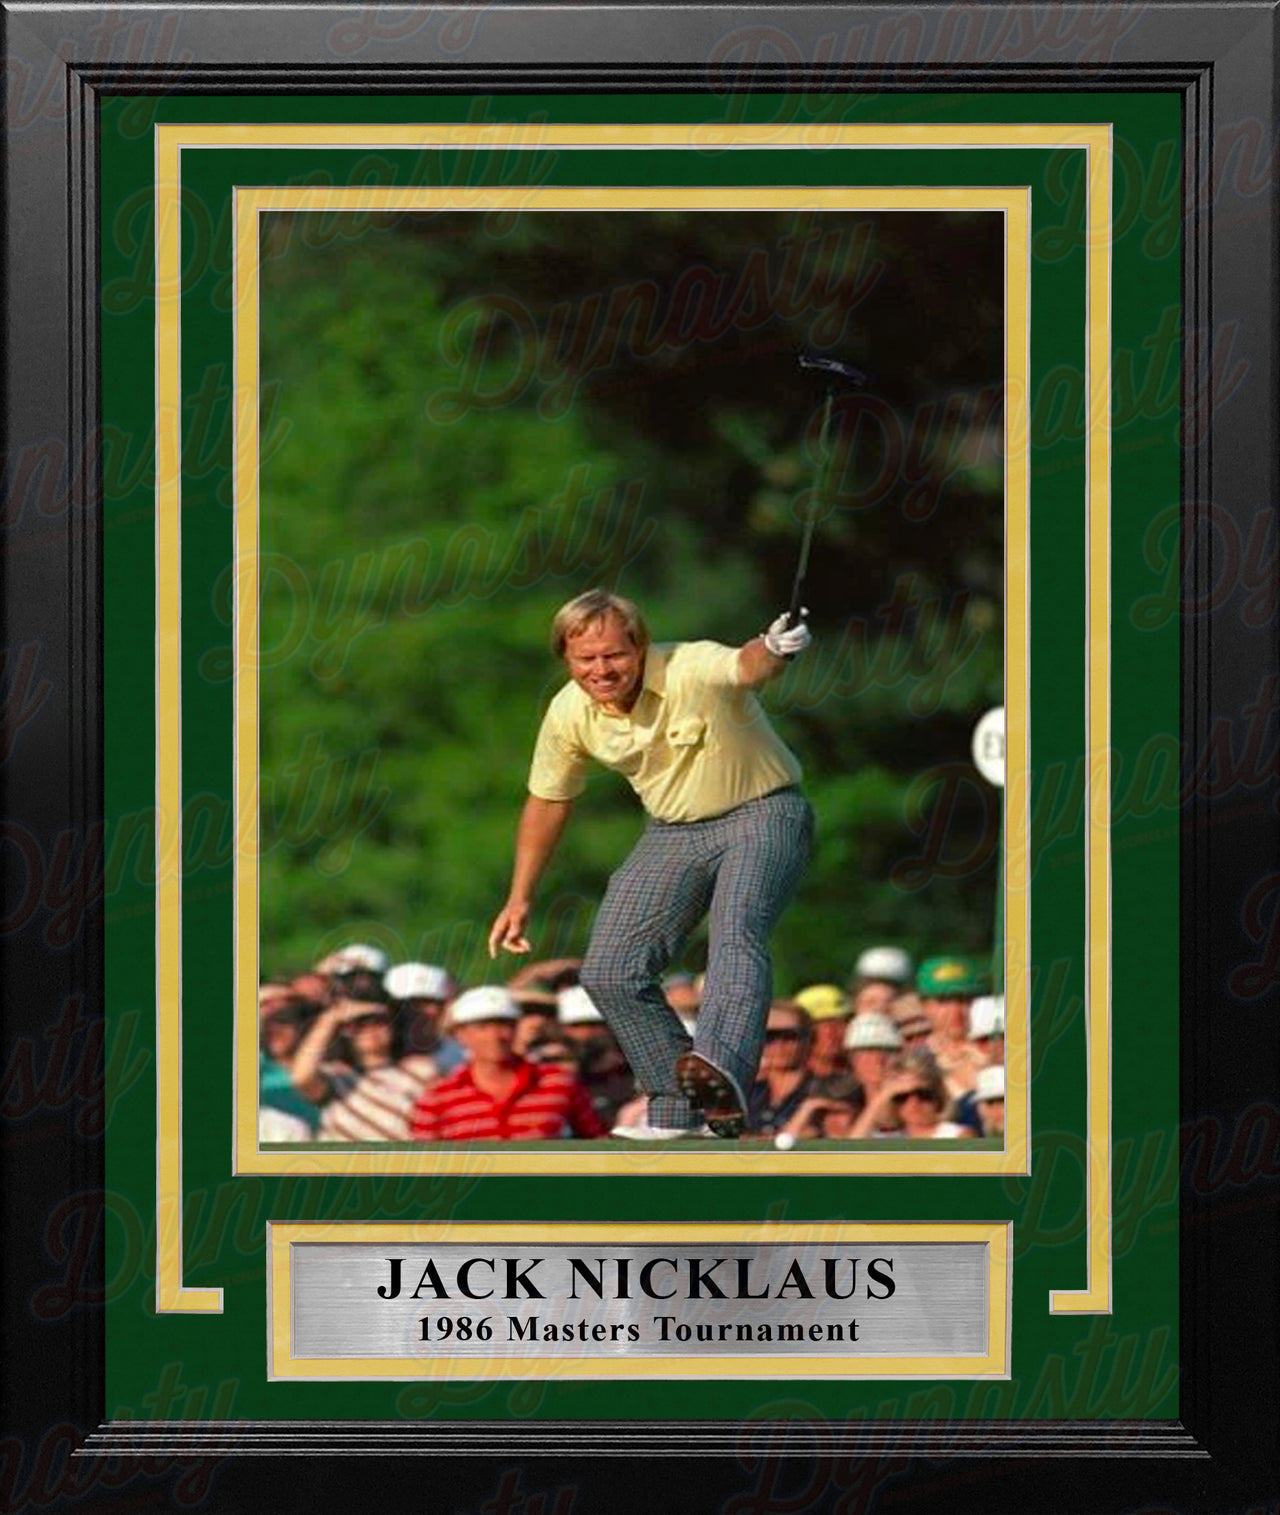 Jack Nicklaus 1986 Masters Tournament Putt on the 17th Framed Golf Photo - Dynasty Sports & Framing 